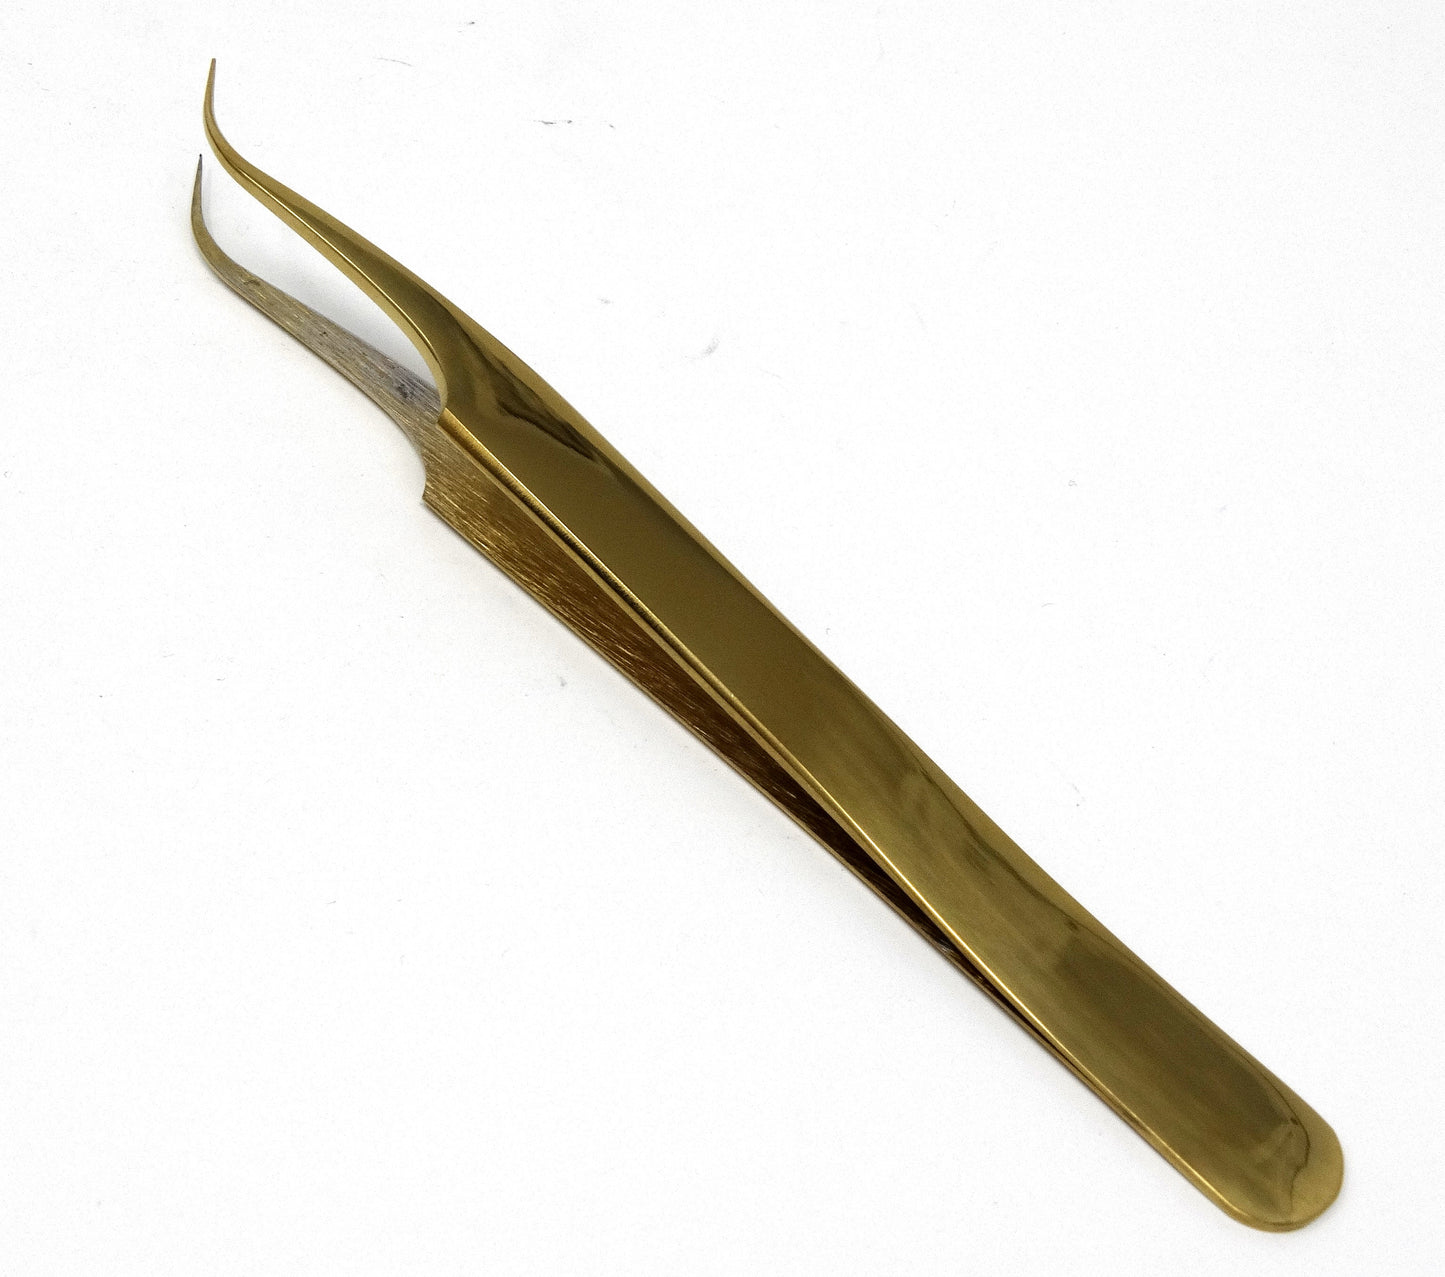 Stainless Steel Micro Surgical Forceps Tweezers Strong Curved, Gold Plated, Premium Quality